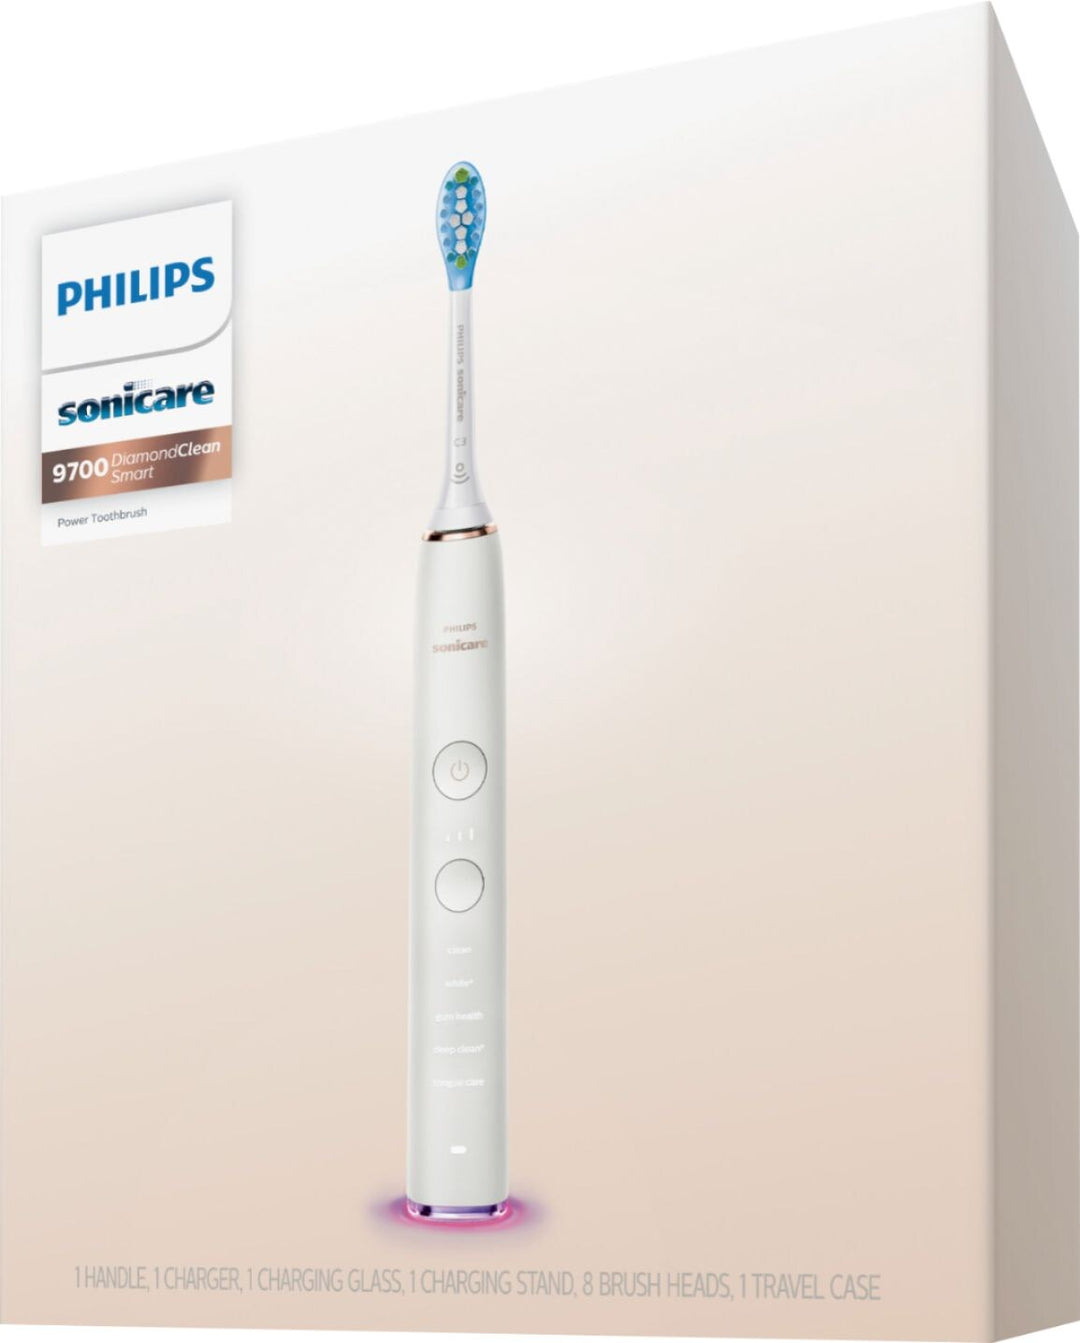 Philips Sonicare - DiamondClean Smart 9700 Rechargeable Toothbrush - Rose Gold_12